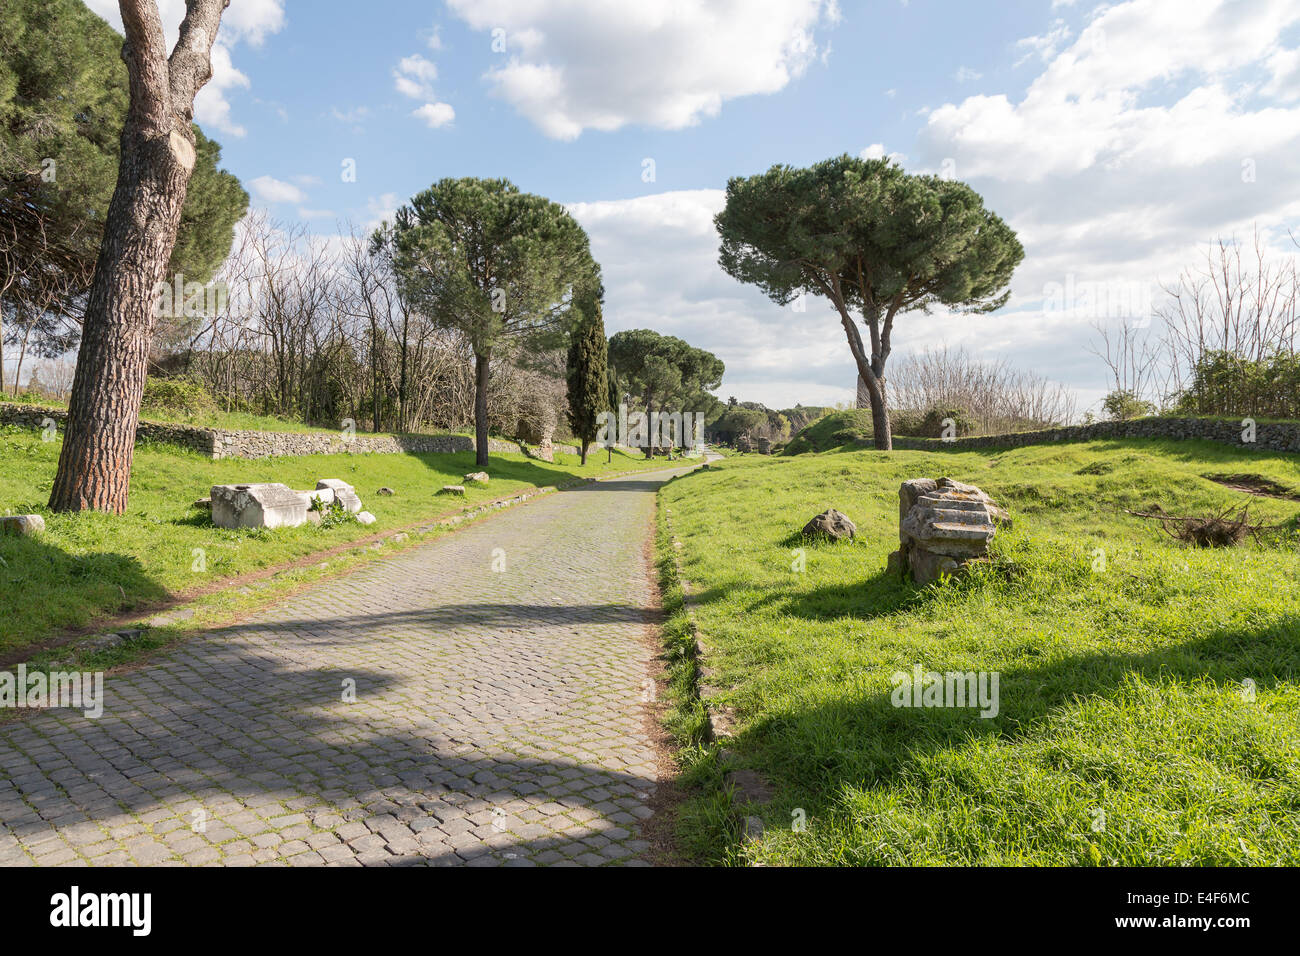 On the Appian Way, the Via Appia Antica, in Rome, Italy. Stock Photo